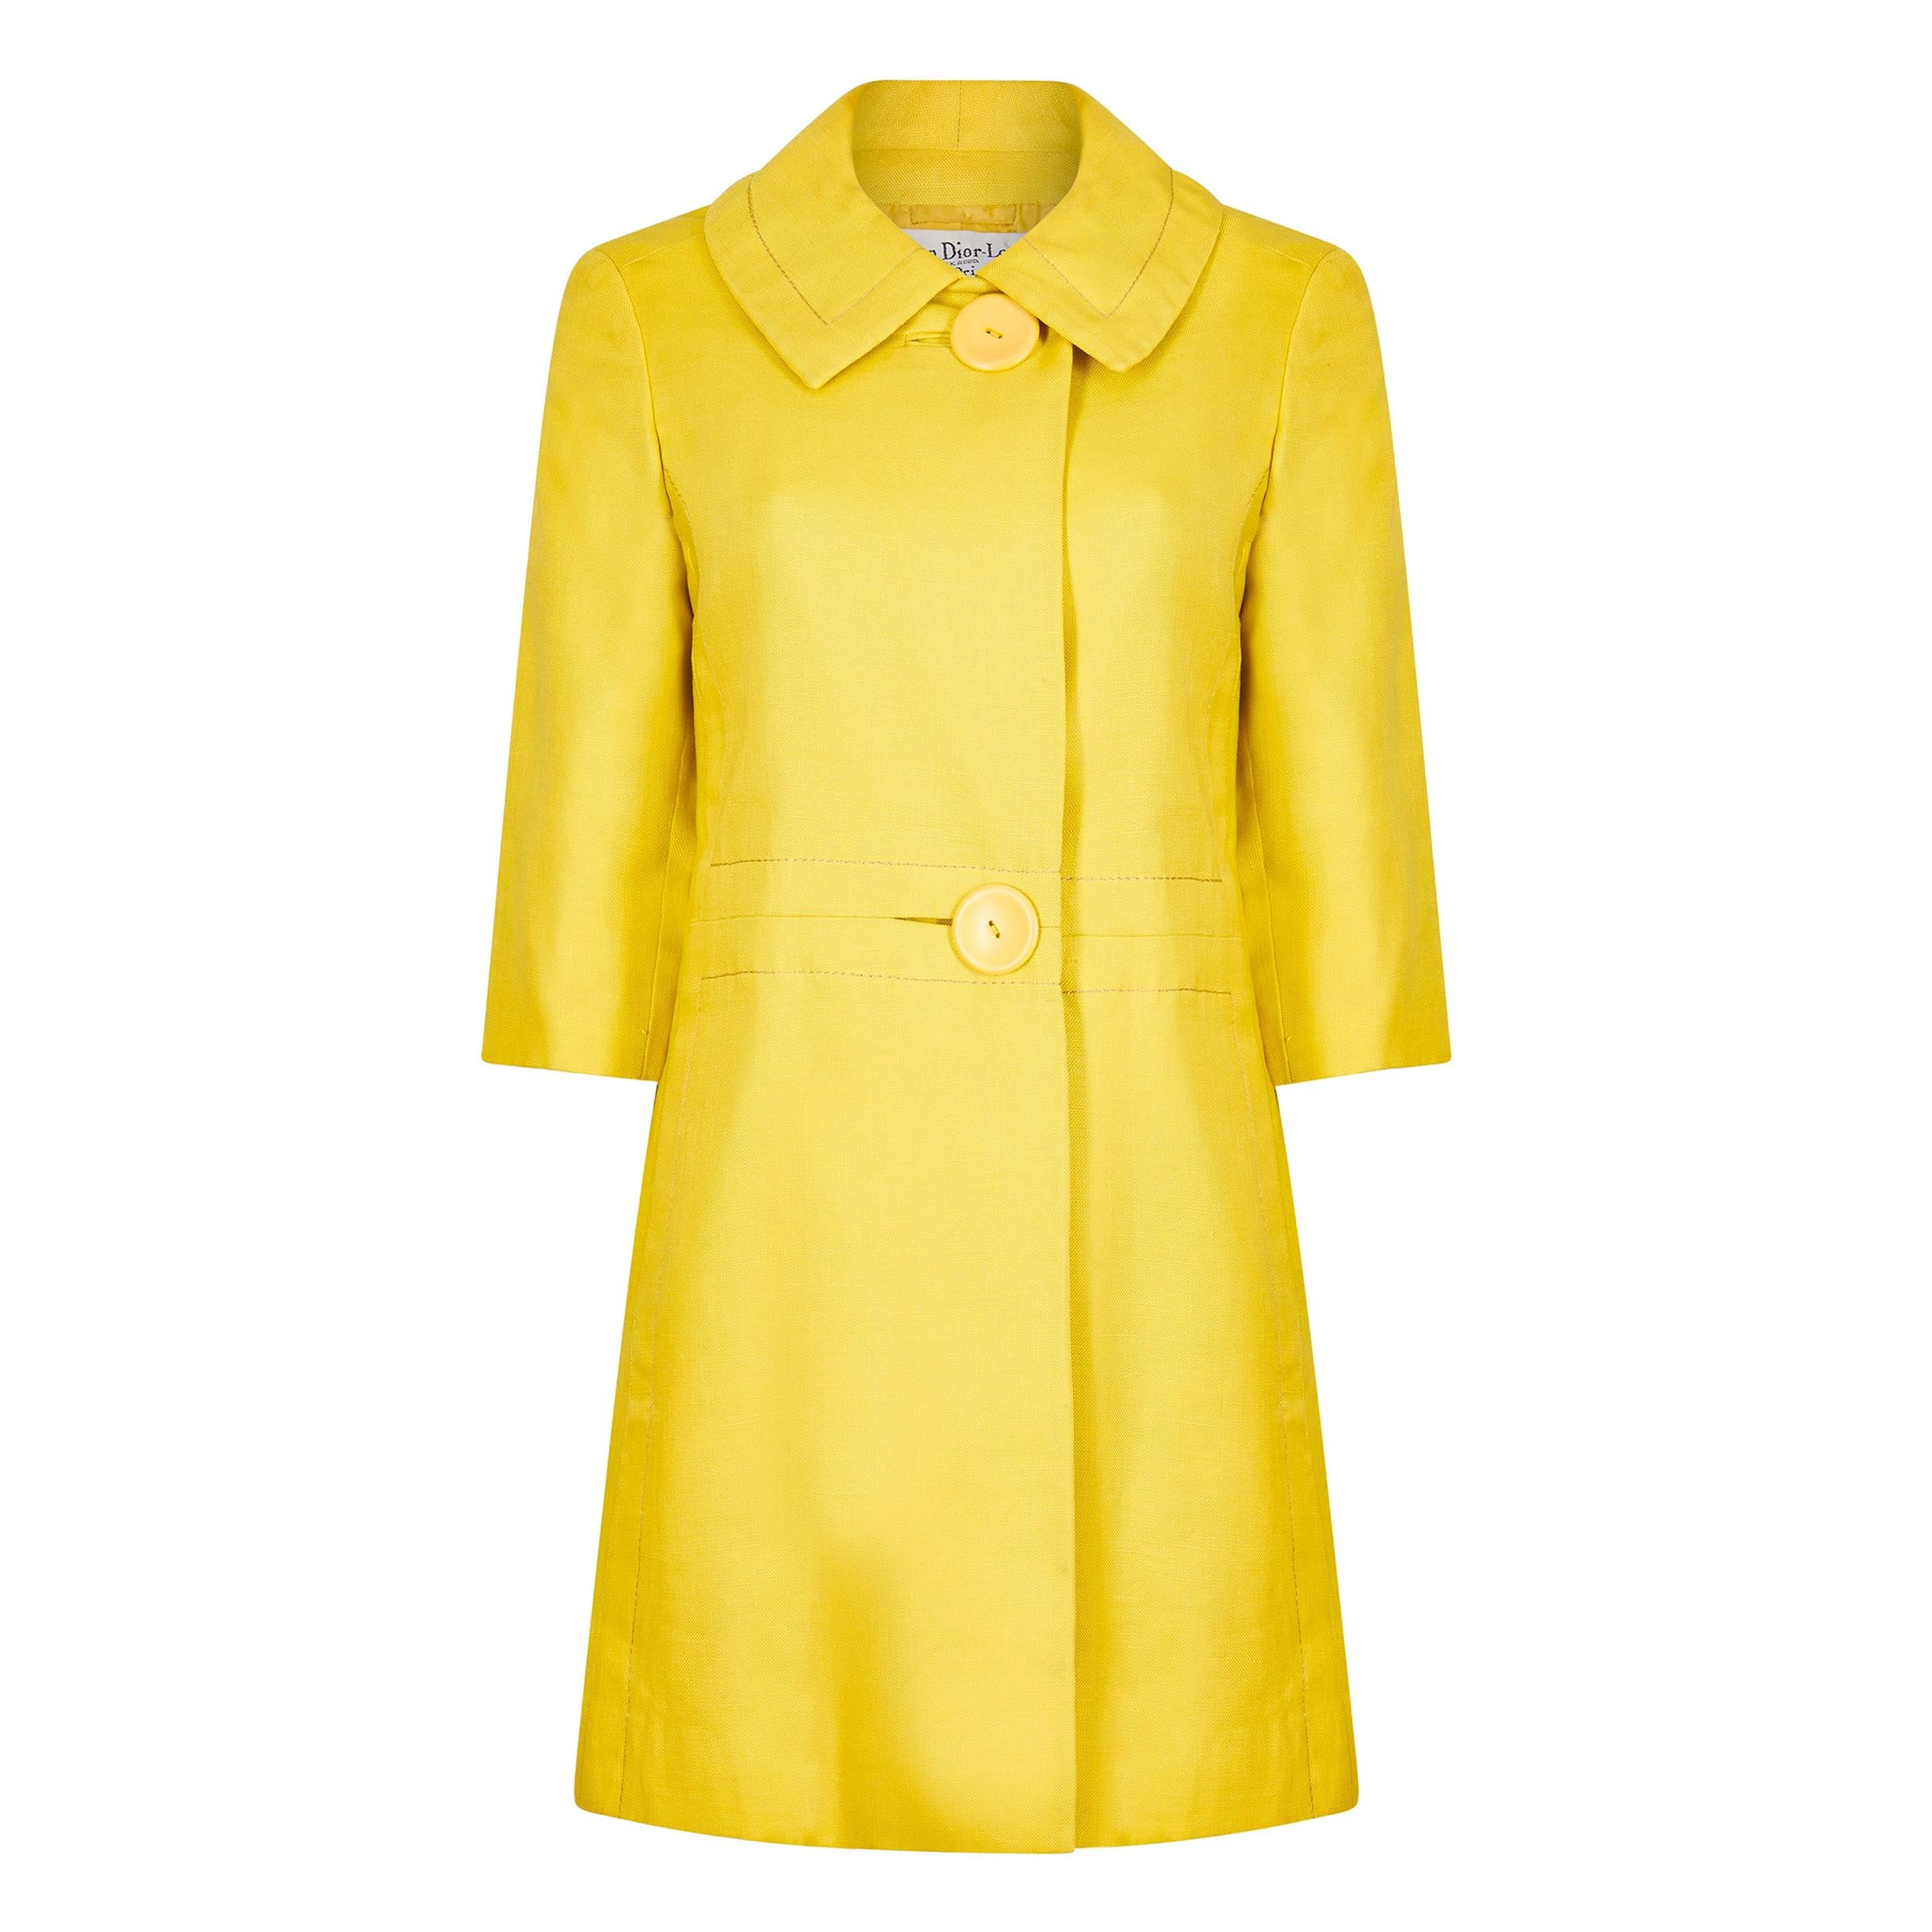 1960s Christian Dior Yellow Mod Style Swing Coat With Oversized Button Detail